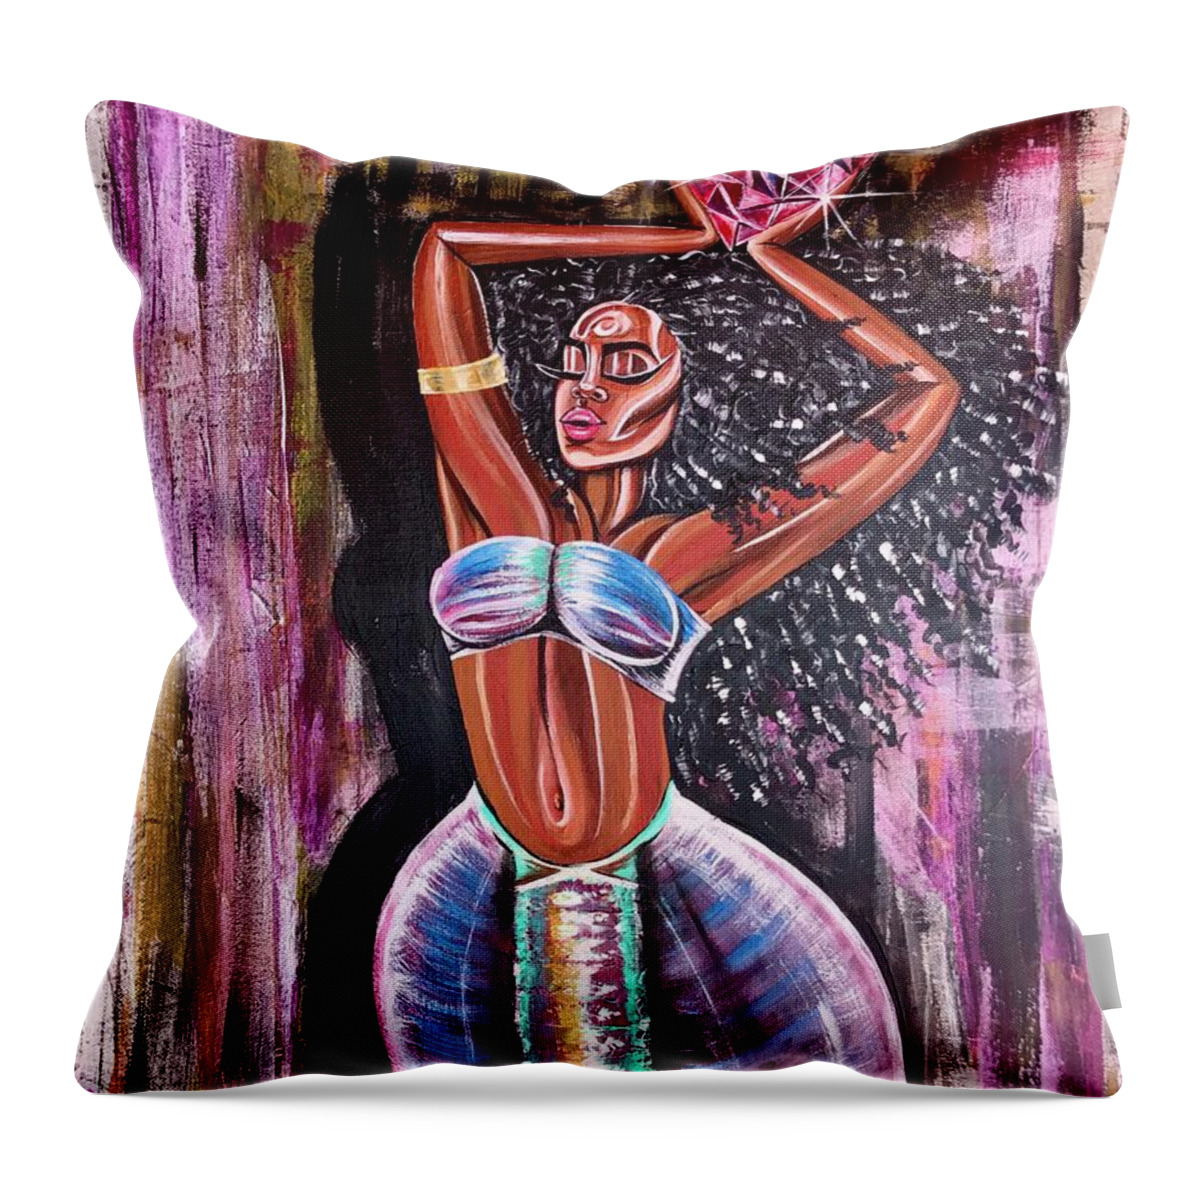 Lion Throw Pillow featuring the painting Self Made Royalty by Artist RiA